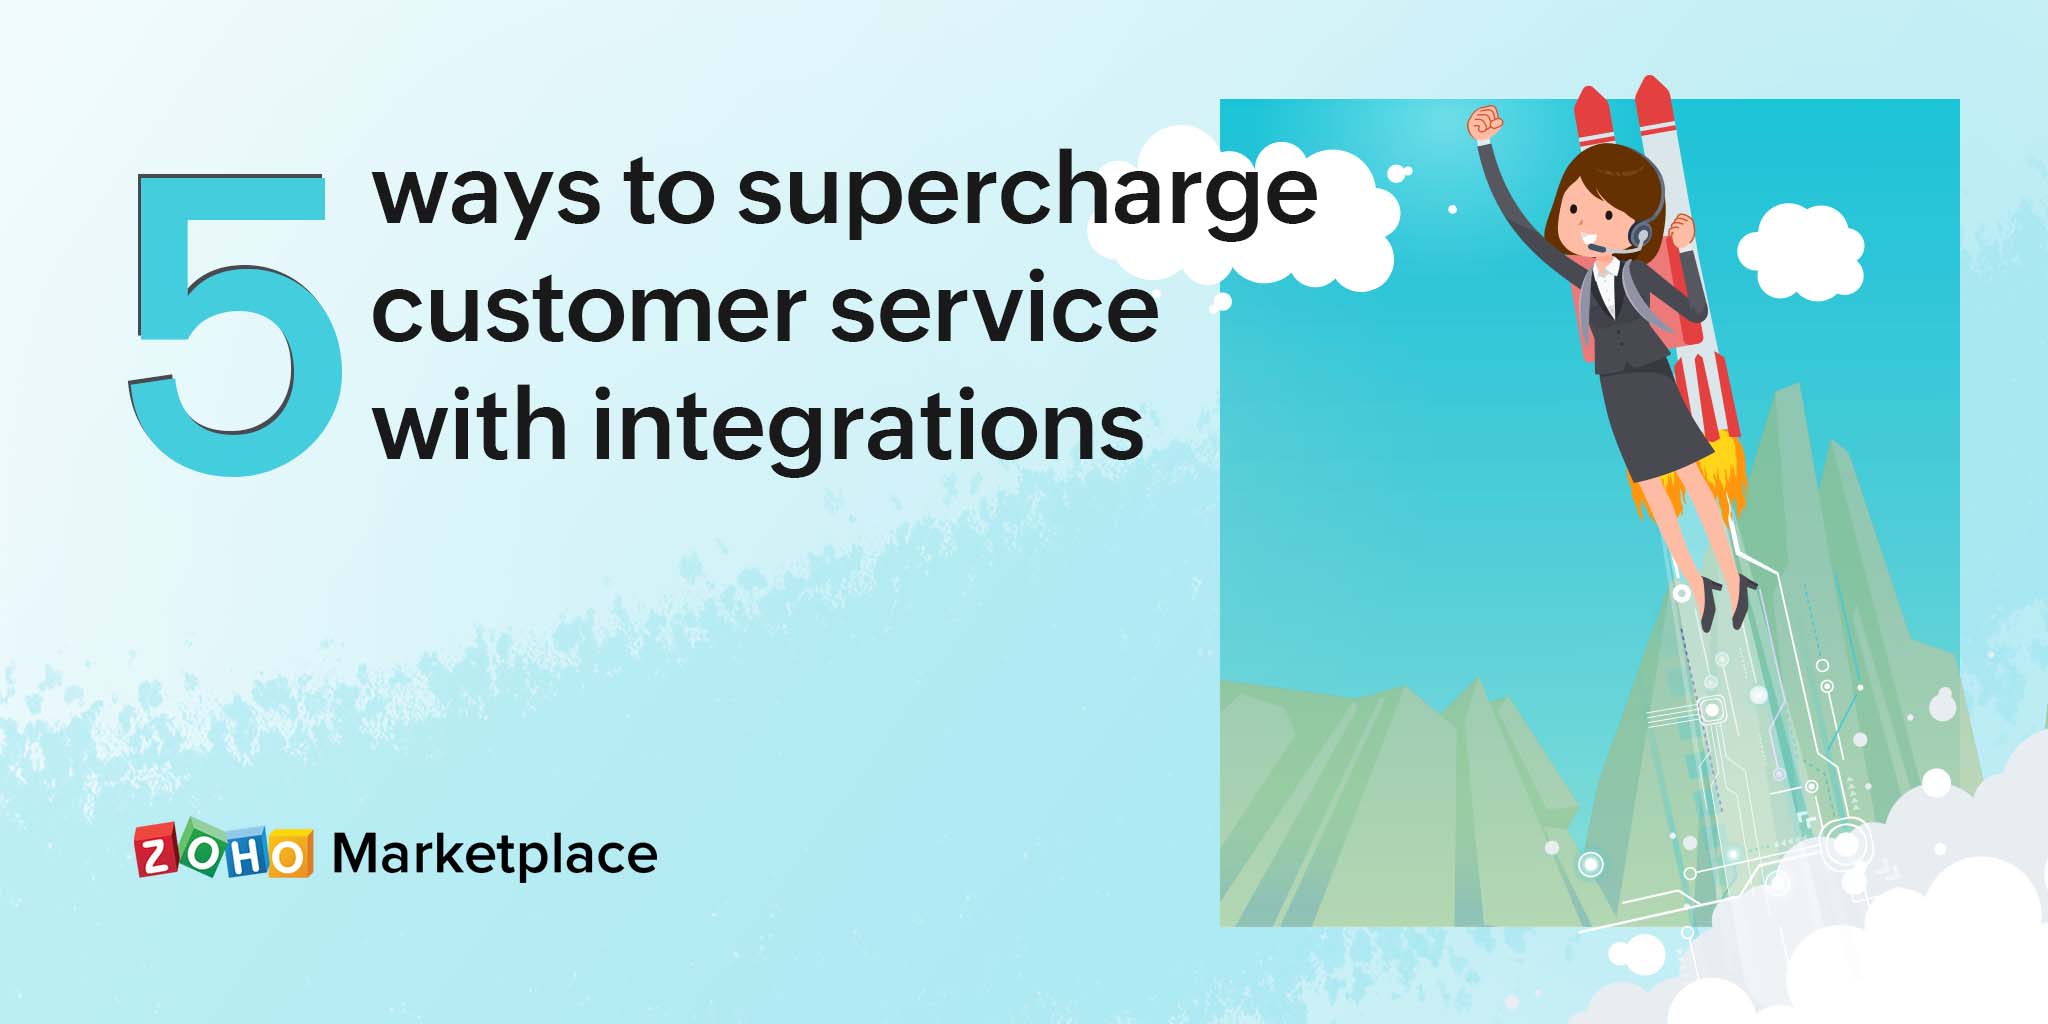 ProTips: 5 ways to supercharge customer service with integrations